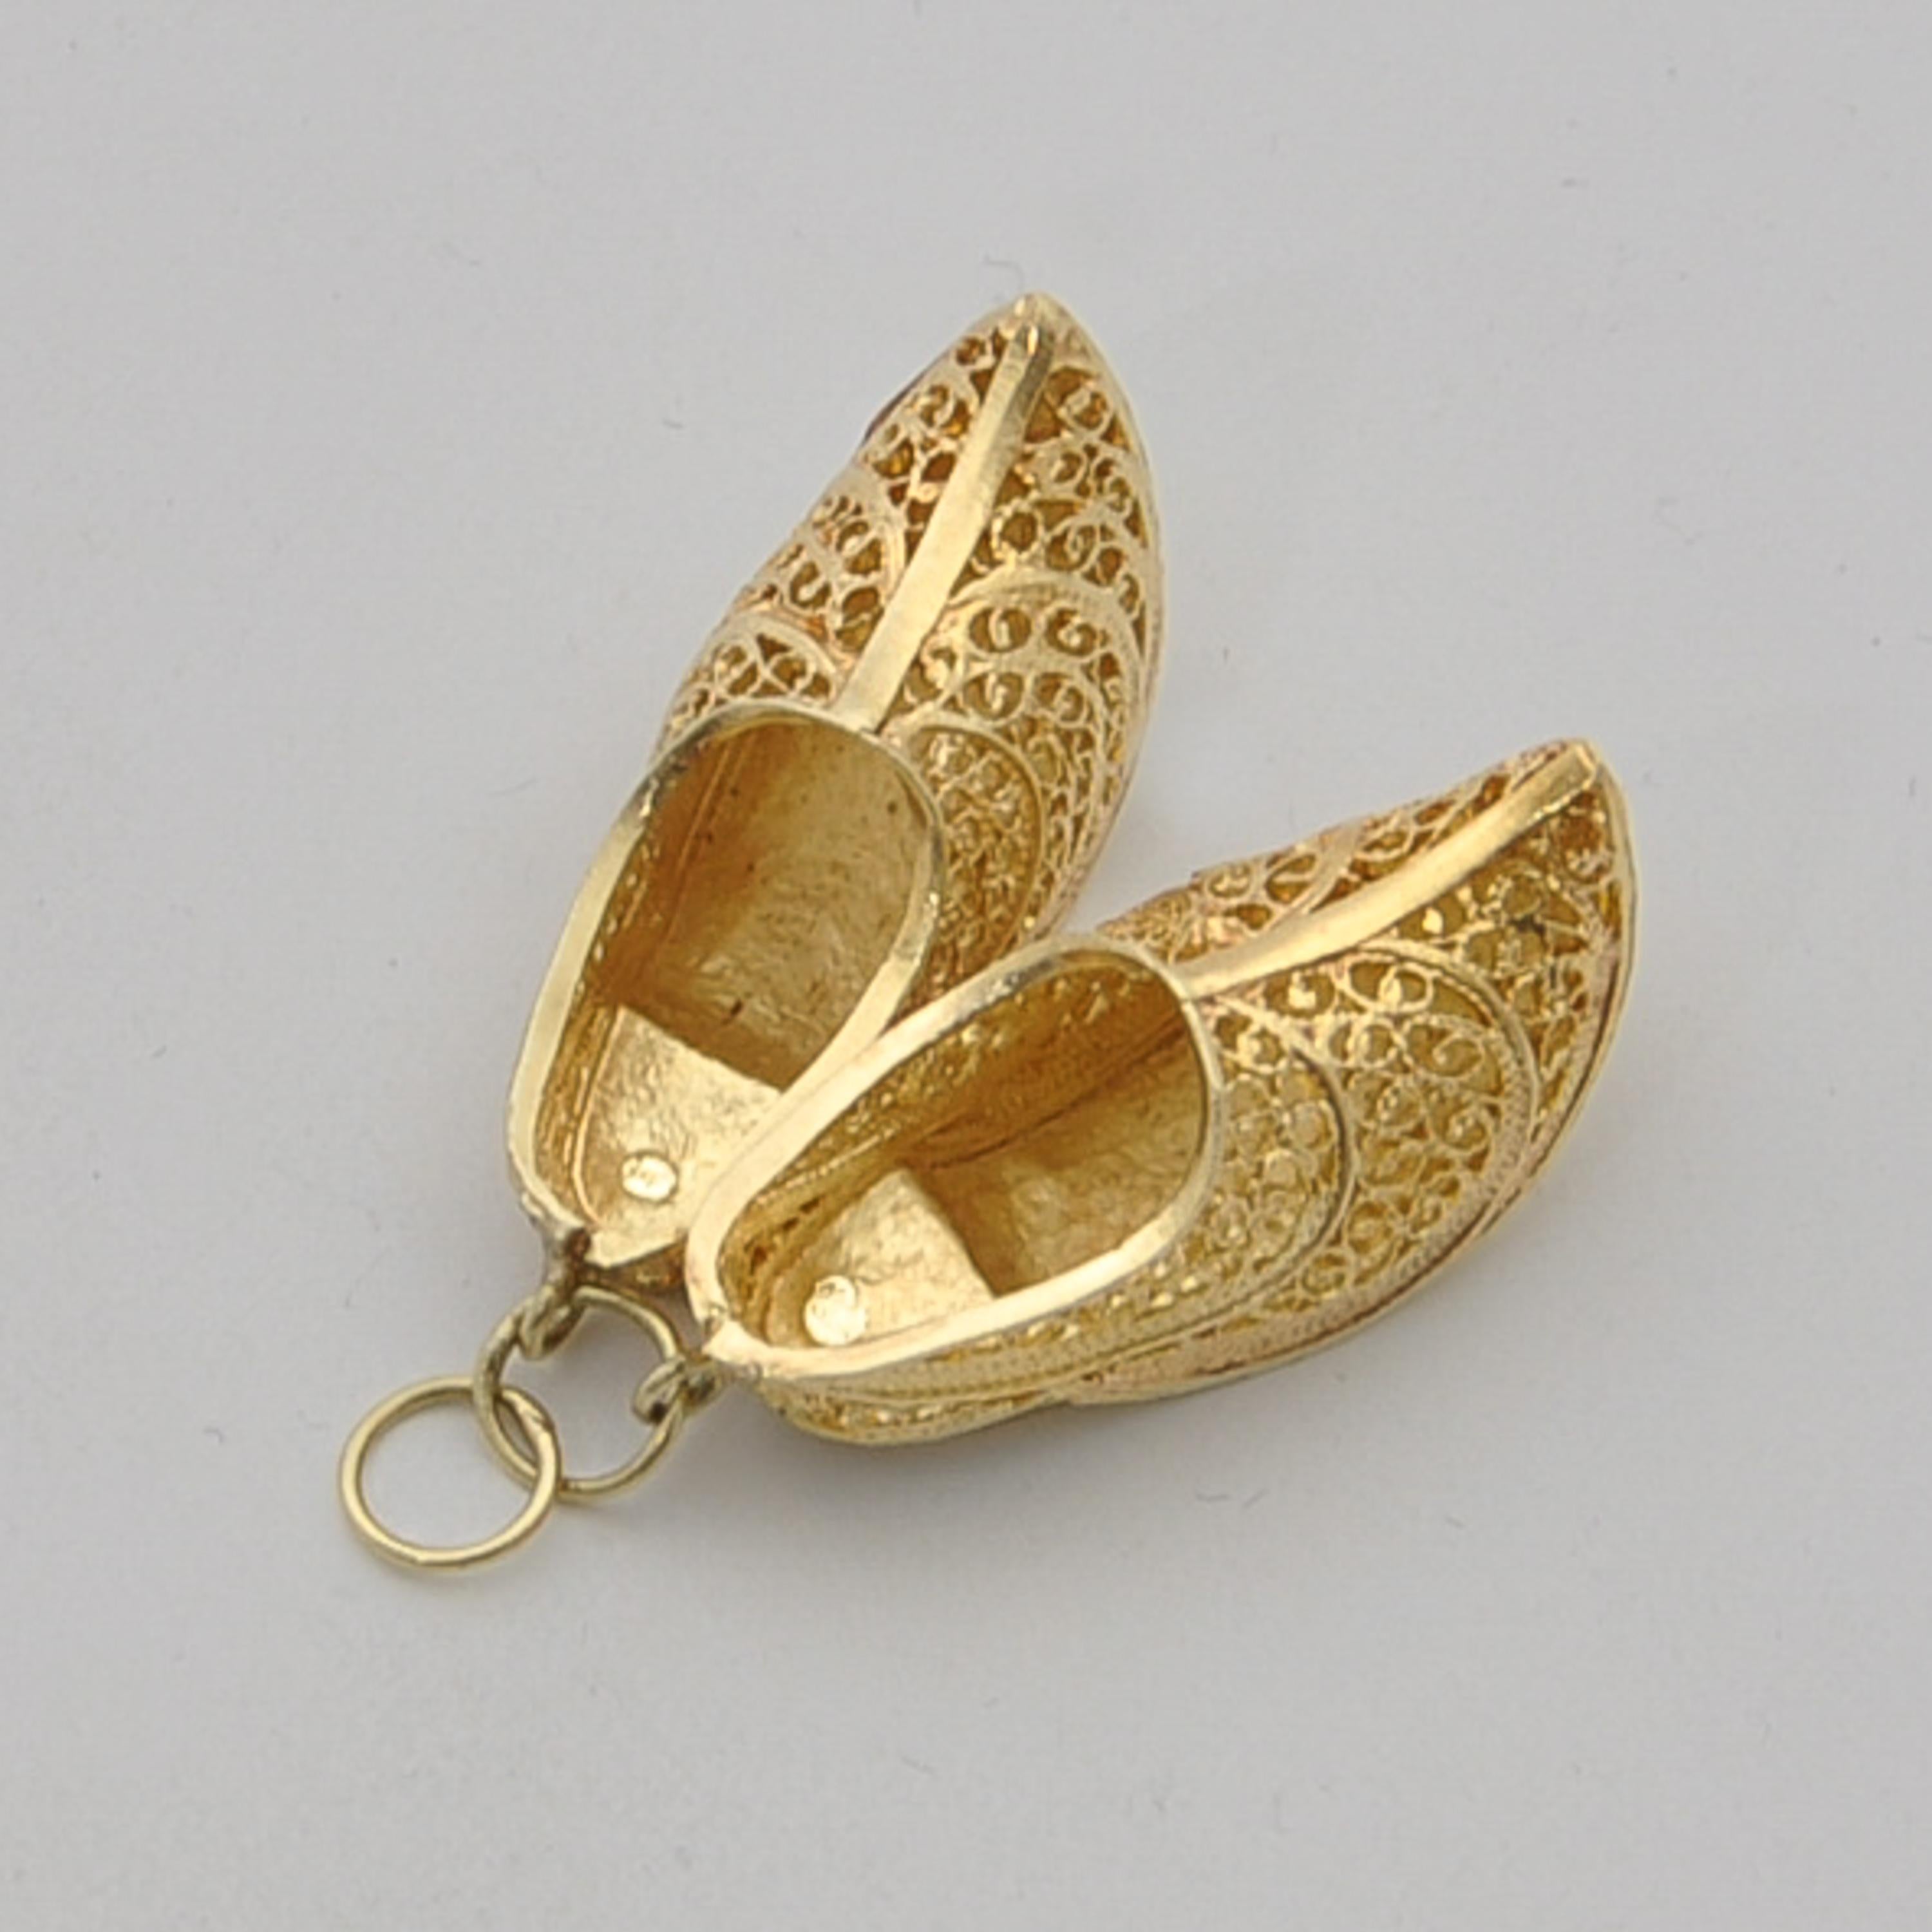 Beautiful vintage three-dimensional stylized Dutch wooden shoes clogs charm pendant. The design of these vintage golden wooden shoes or clogs is exceptional. The clogs are very richly made of fine filigree. The Netherlands is the country of tulips,